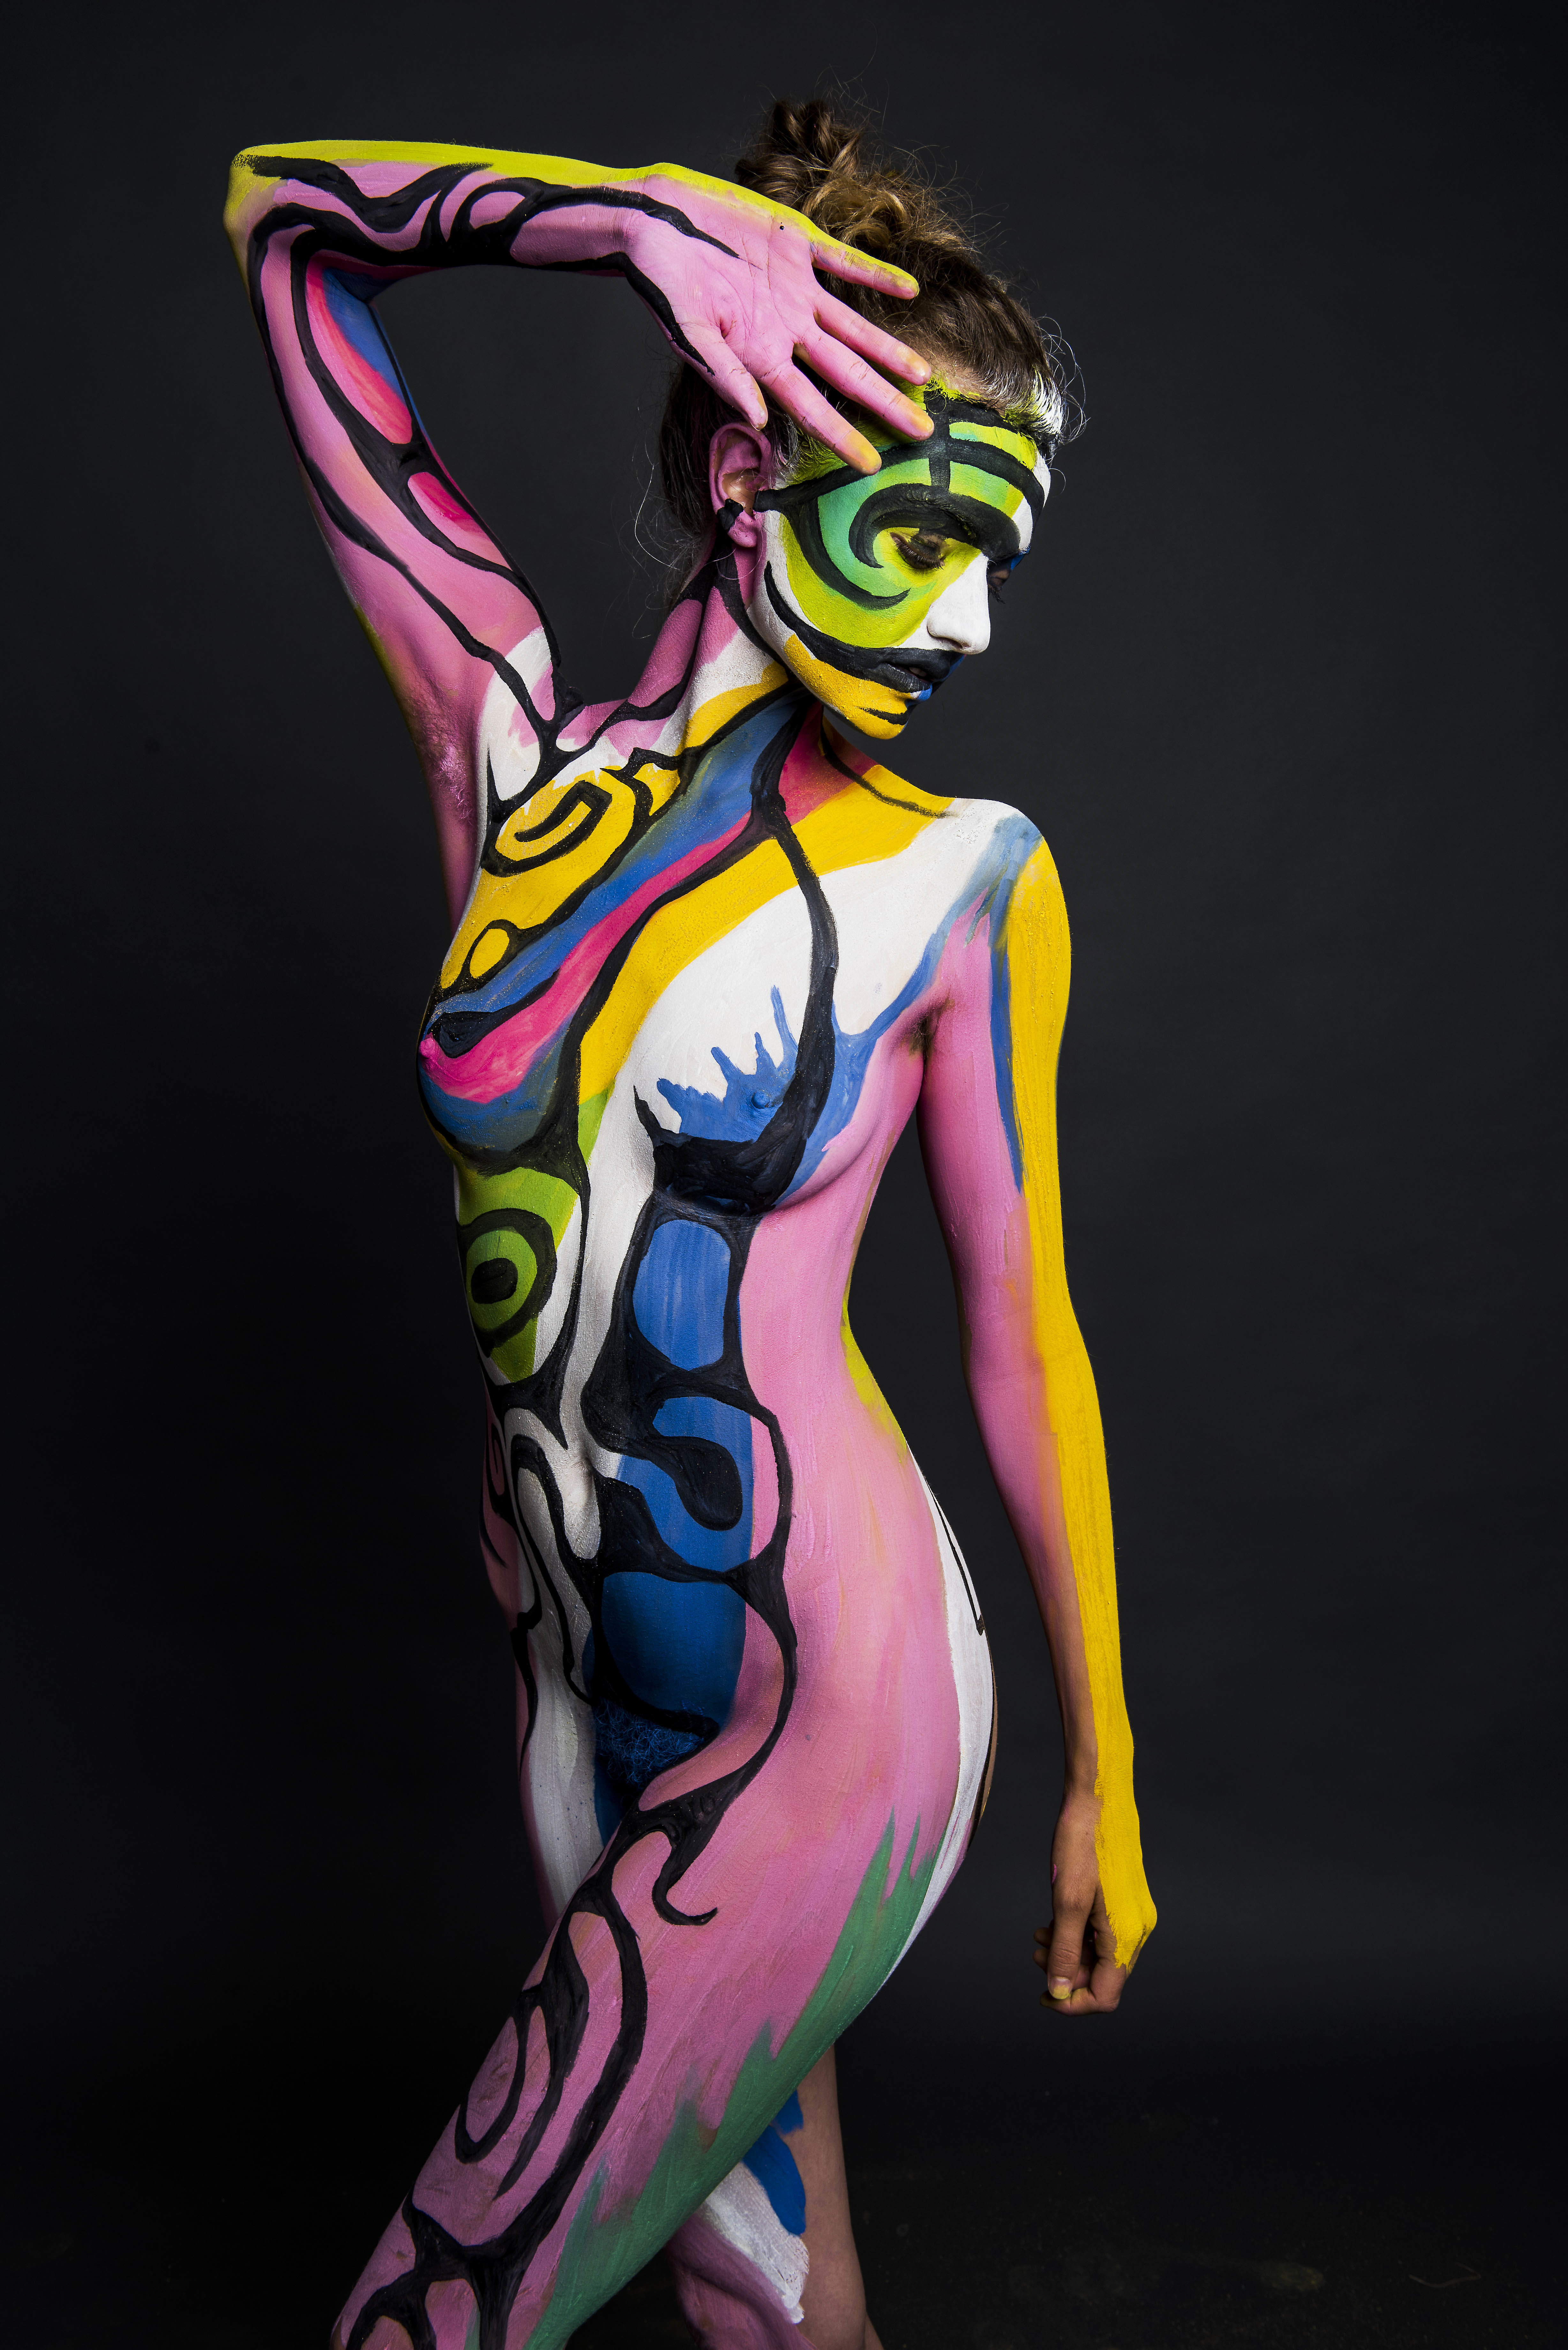 This Is What Its Like To Strip And Get Body Painted For The First Time (NSFW) HuffPost Weird News picture